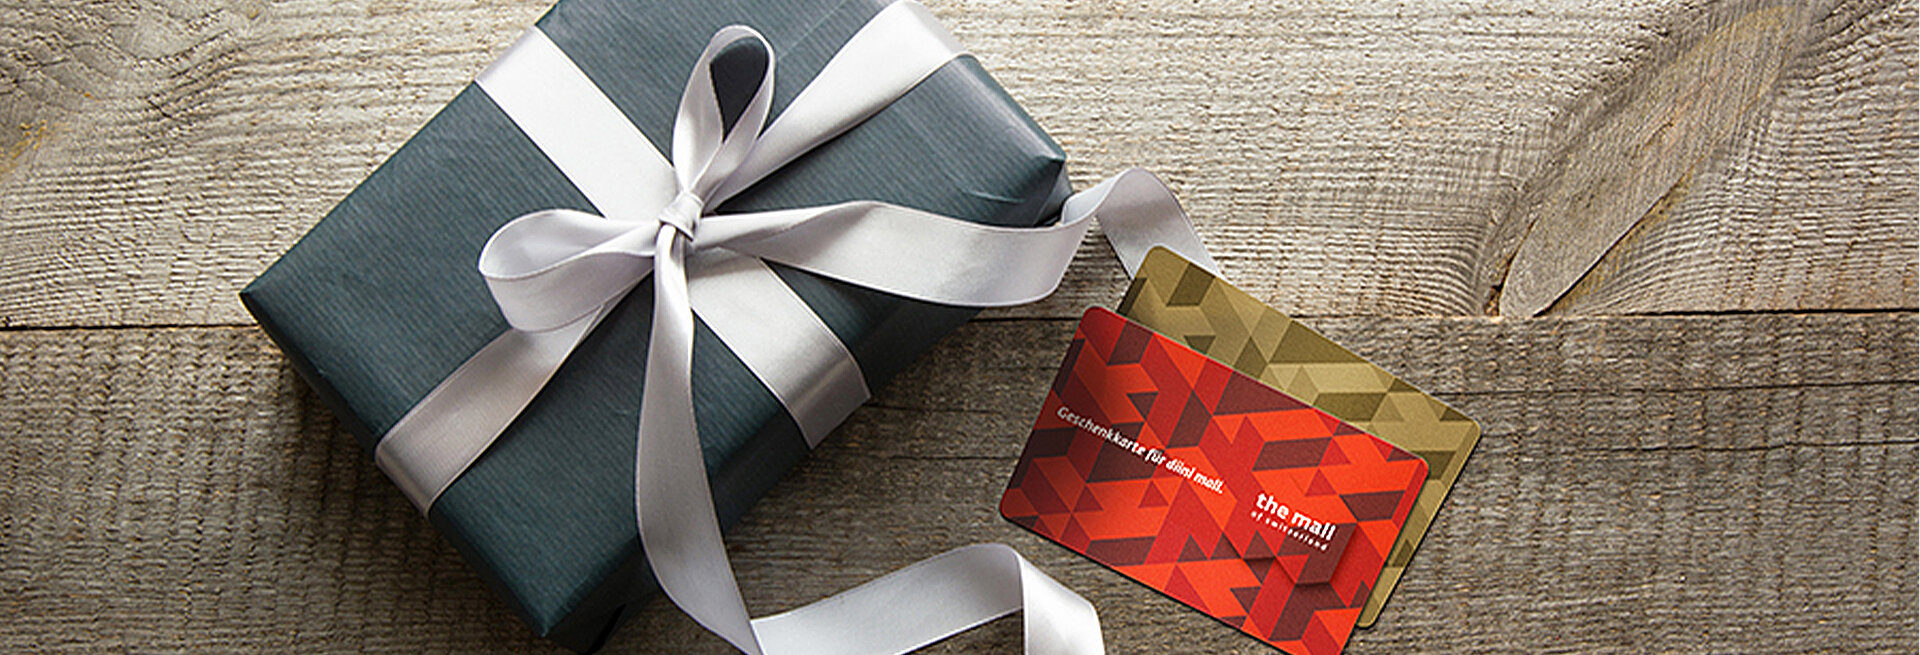 Give the gift of leisure and shopping pleasure with our gift cards!